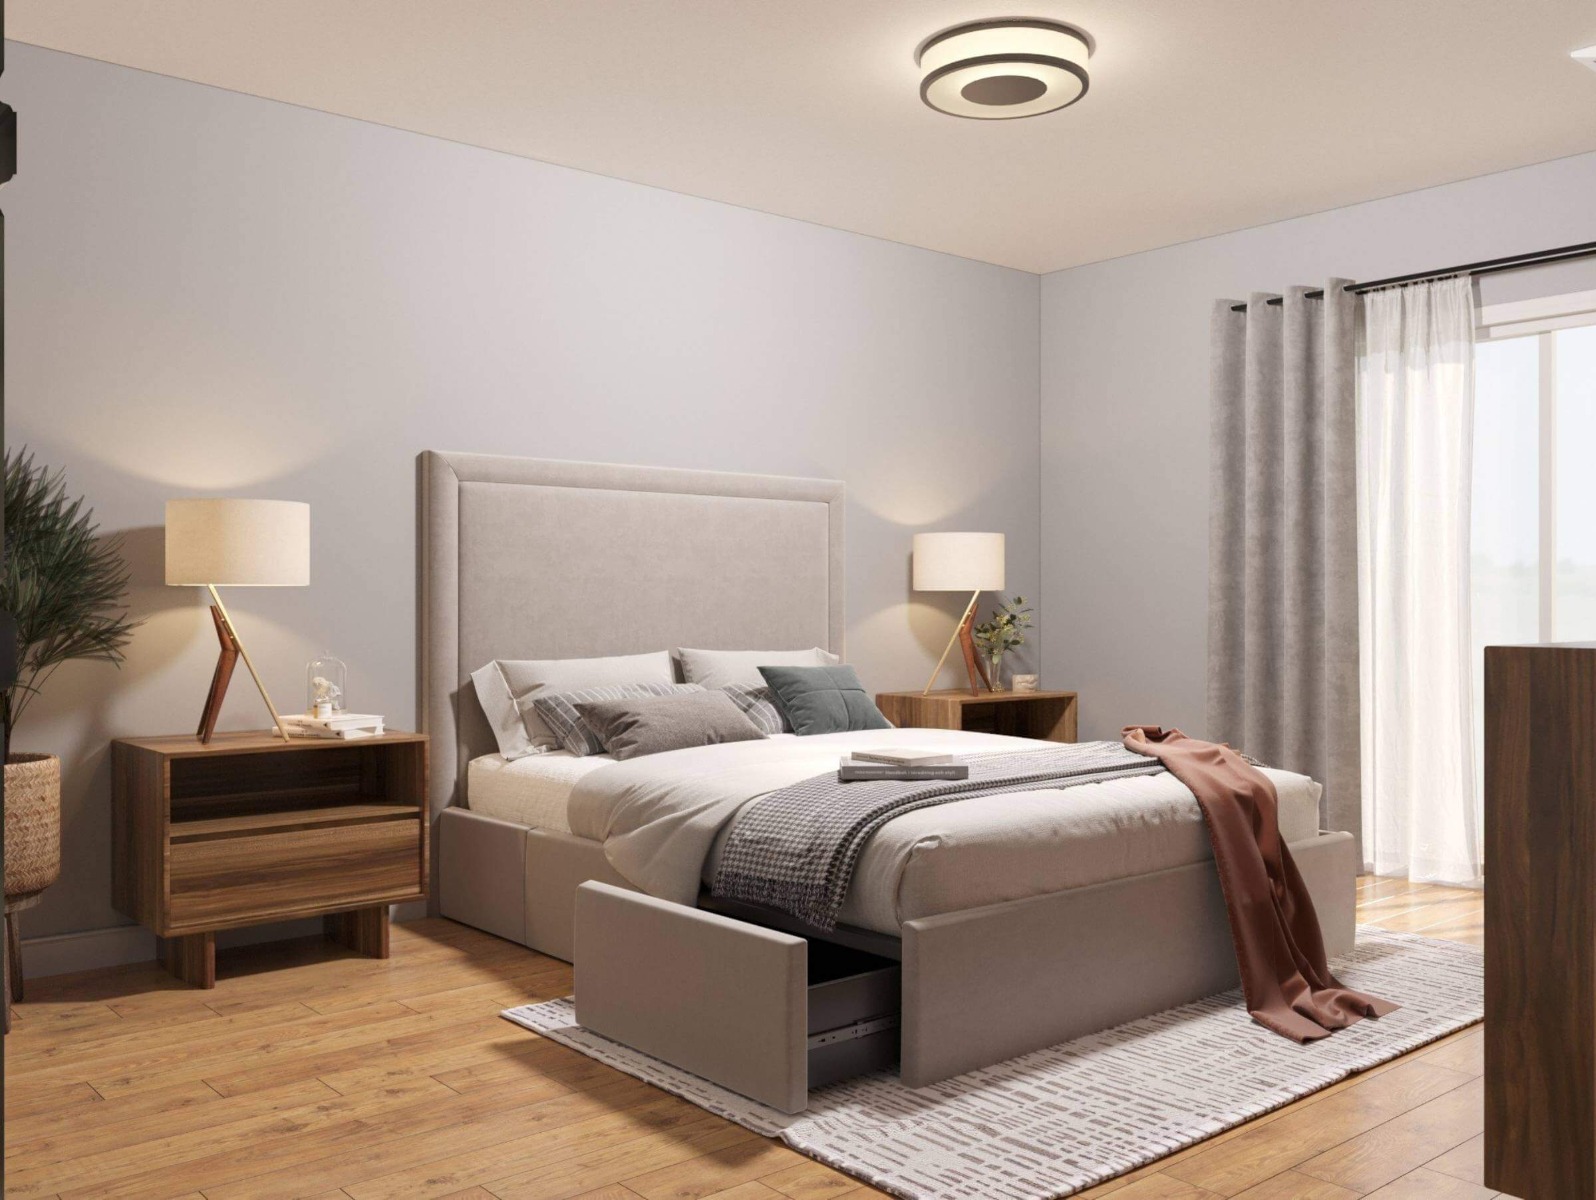 hestya-online-interior-design-with-an-affordable-bedroom-2